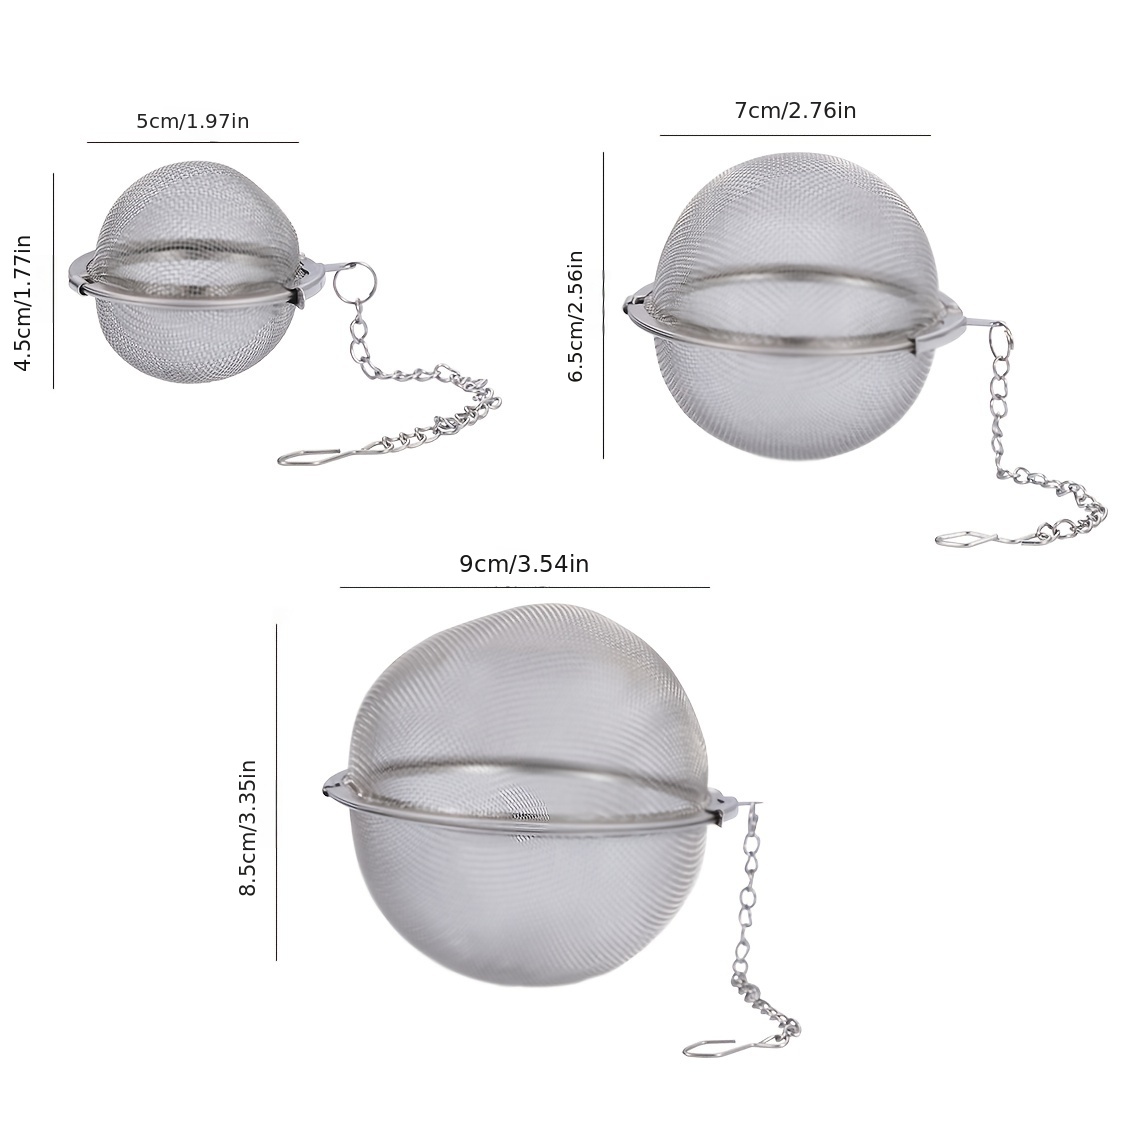 1 pack premium 304 stainless steel tea ball perfect for brewing delicious tea at home 3